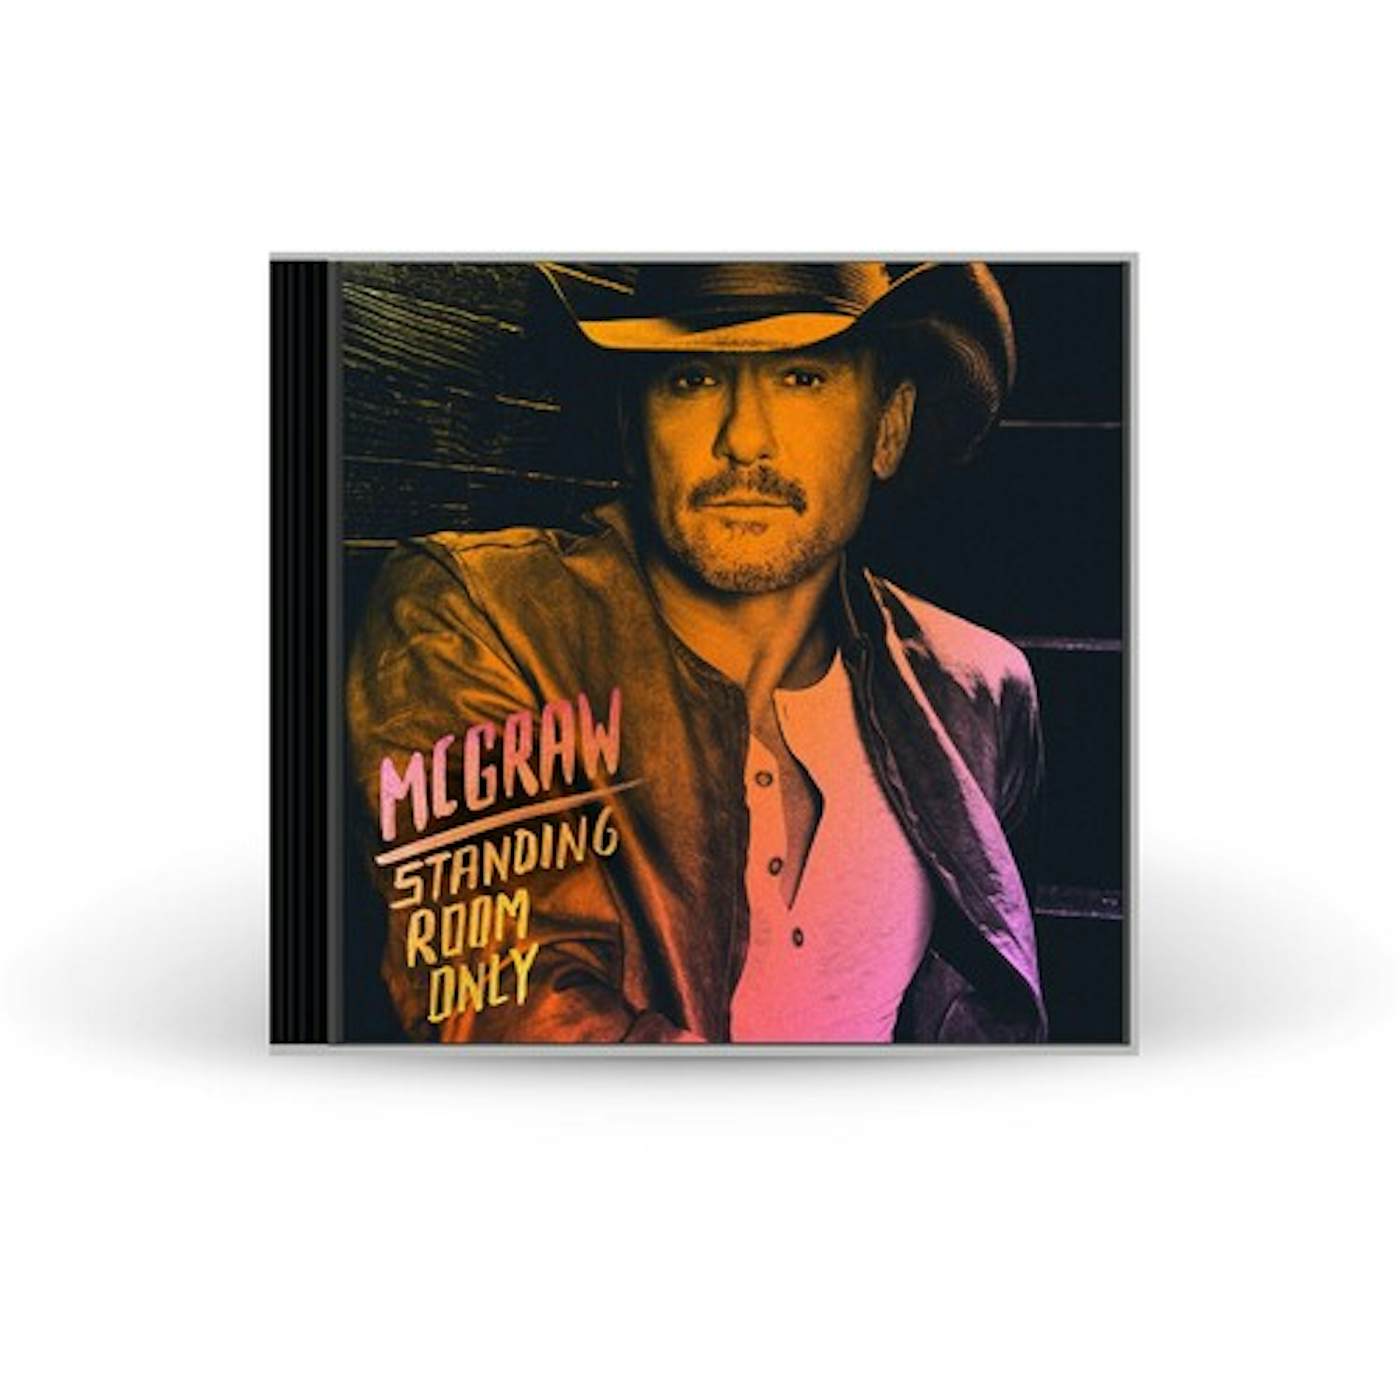 Tim McGraw STANDING ROOM ONLY CD